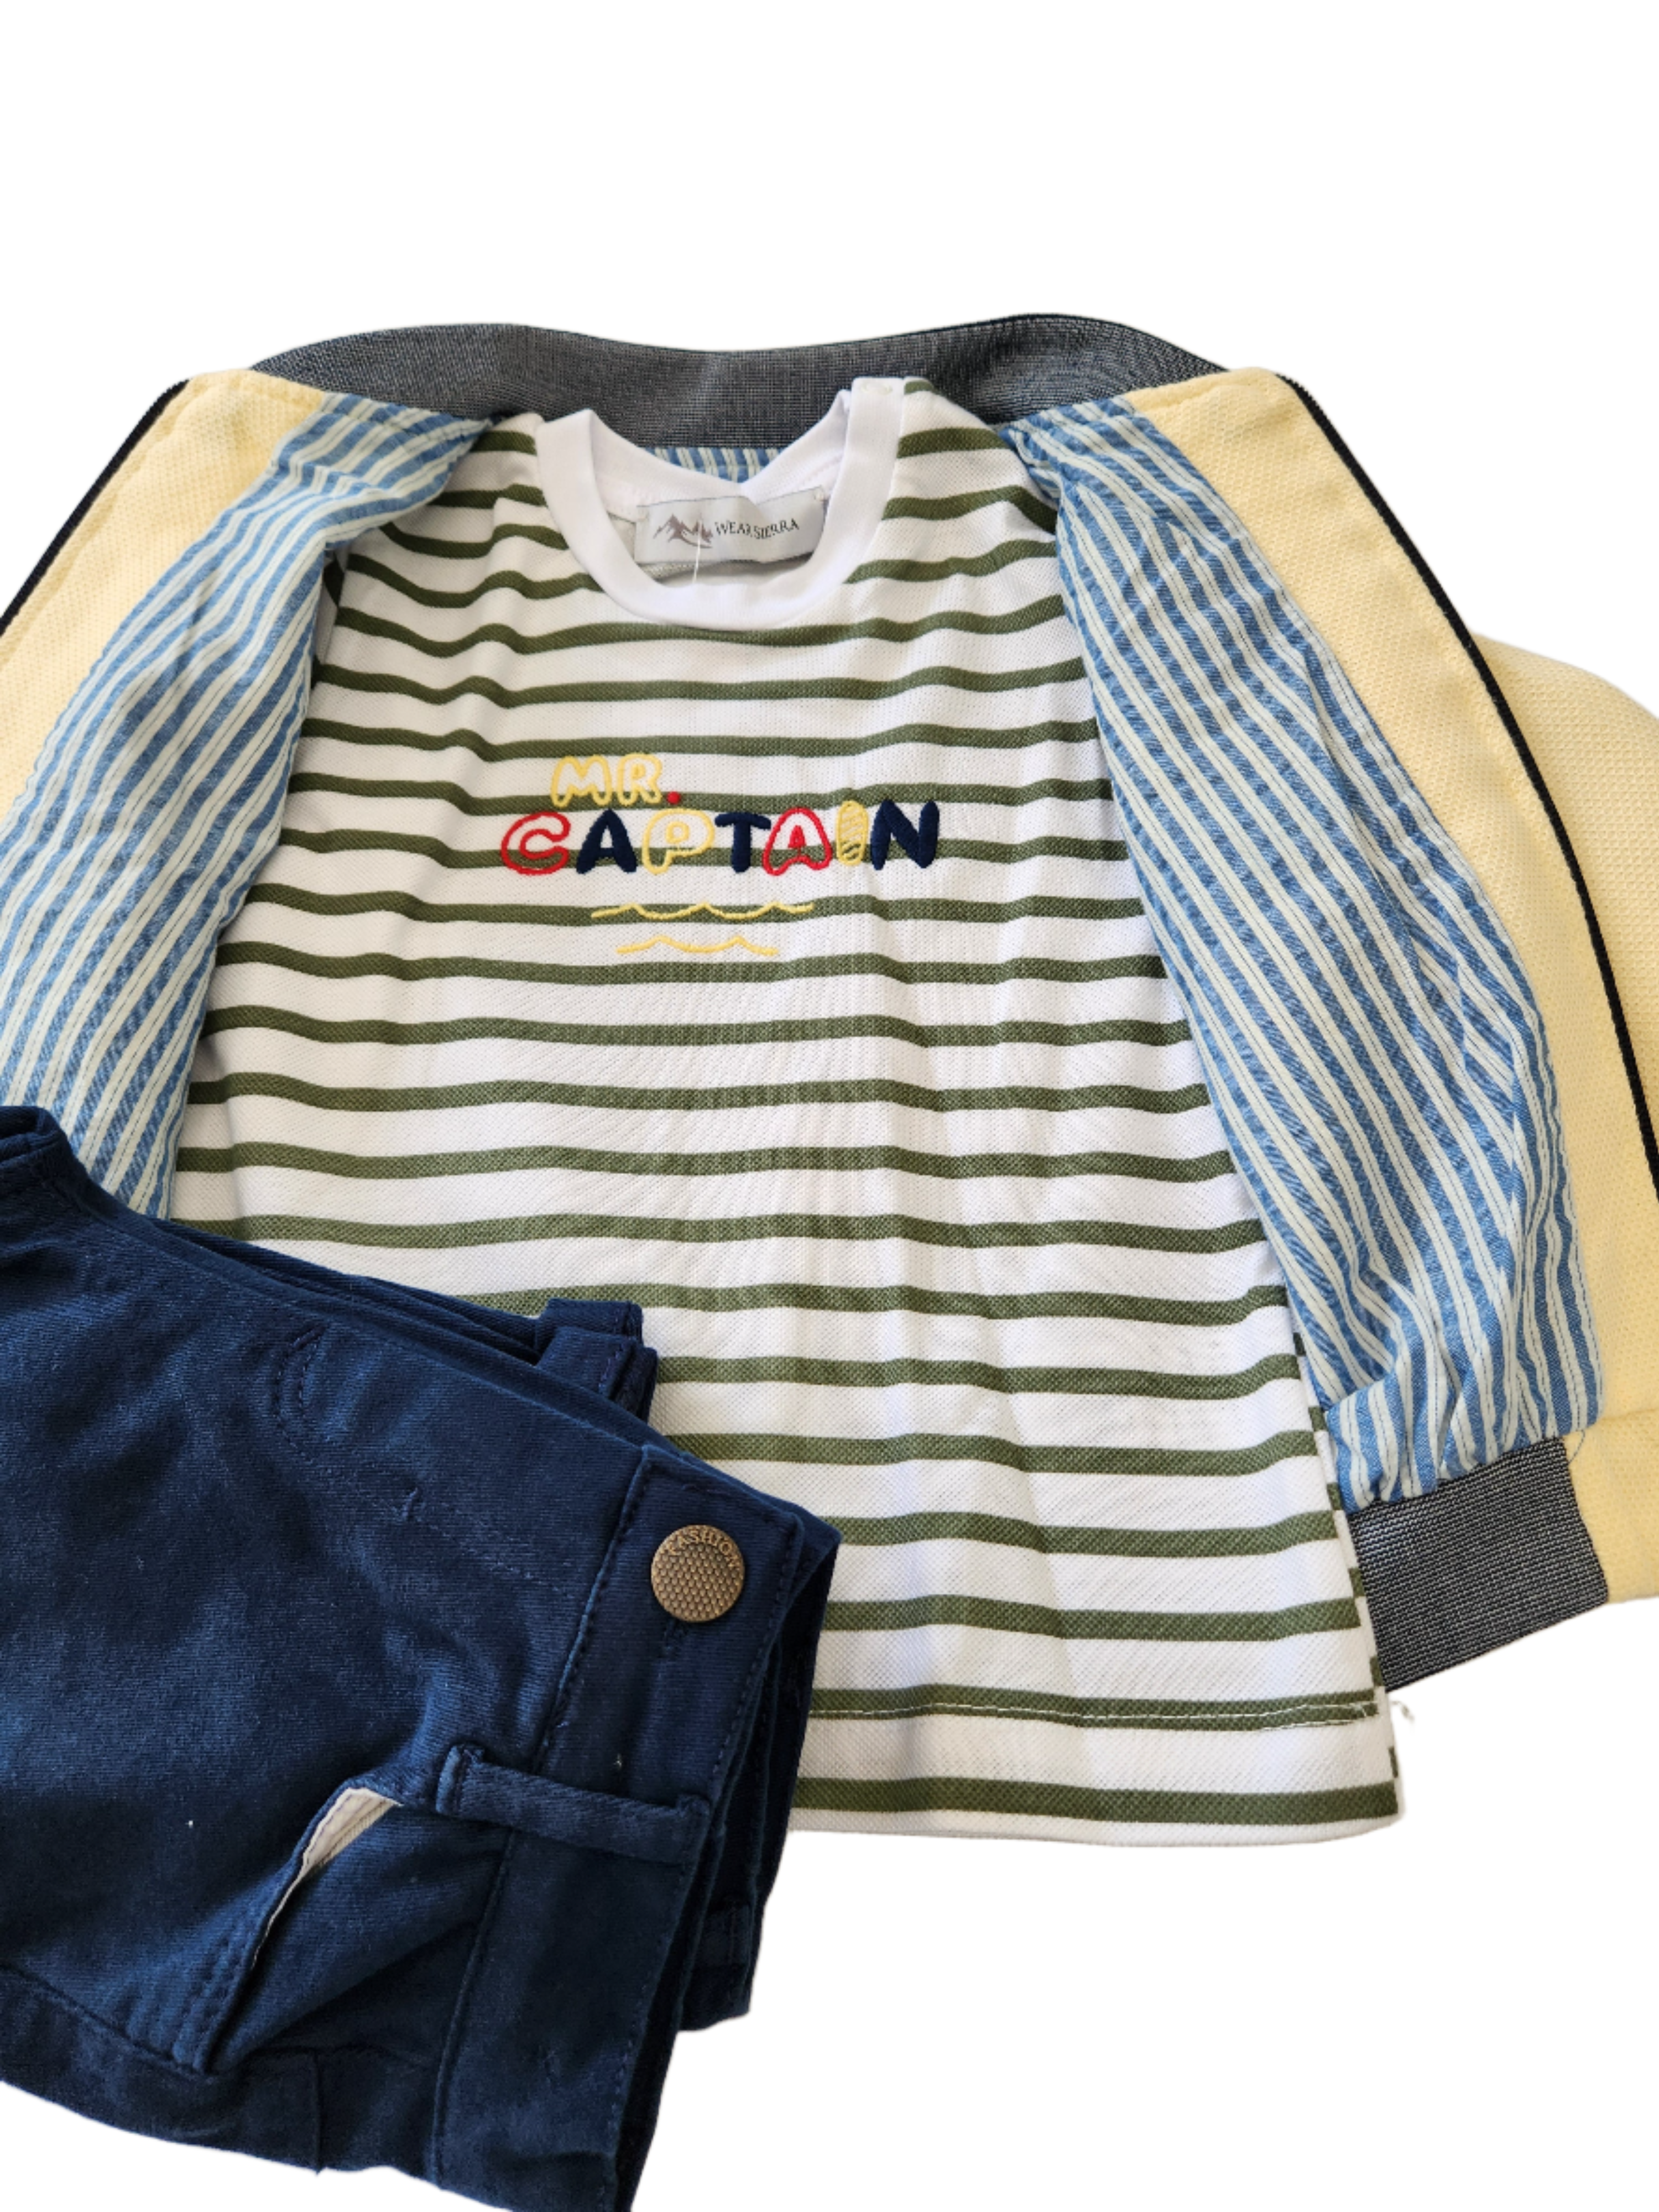 Infant and Toddler Boy's Blue and Yellow 3-Piece Pants, Shirt and Jacket Set with Nautical Theme